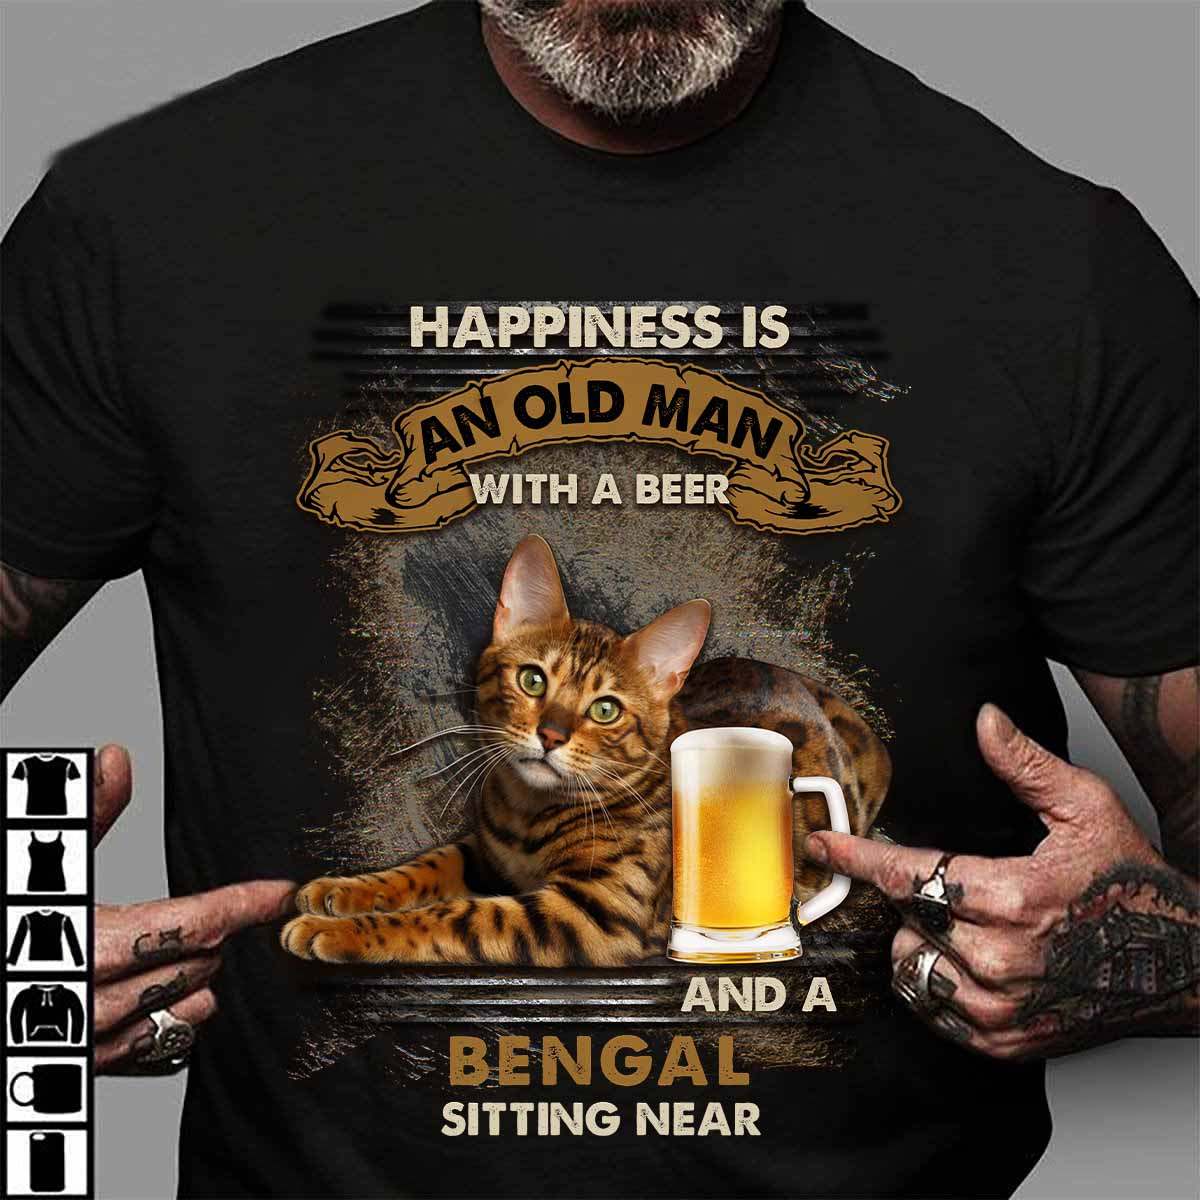 Happiness is an old man with a beer and a Bengal sitting near - Bengal cat